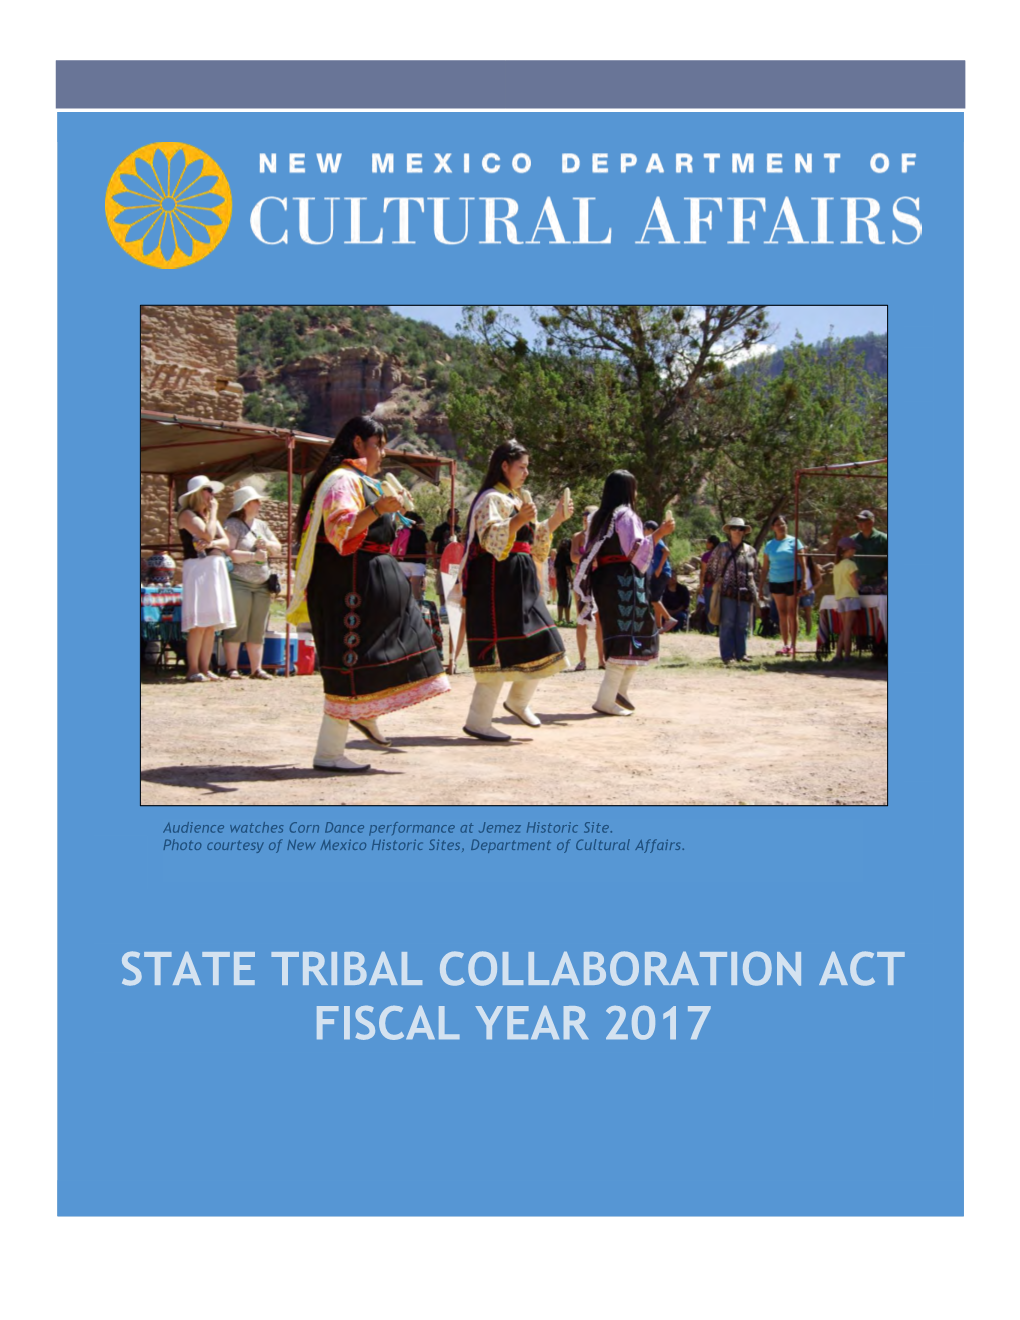 State Tribal Collaboration Act Fiscal Year 2017